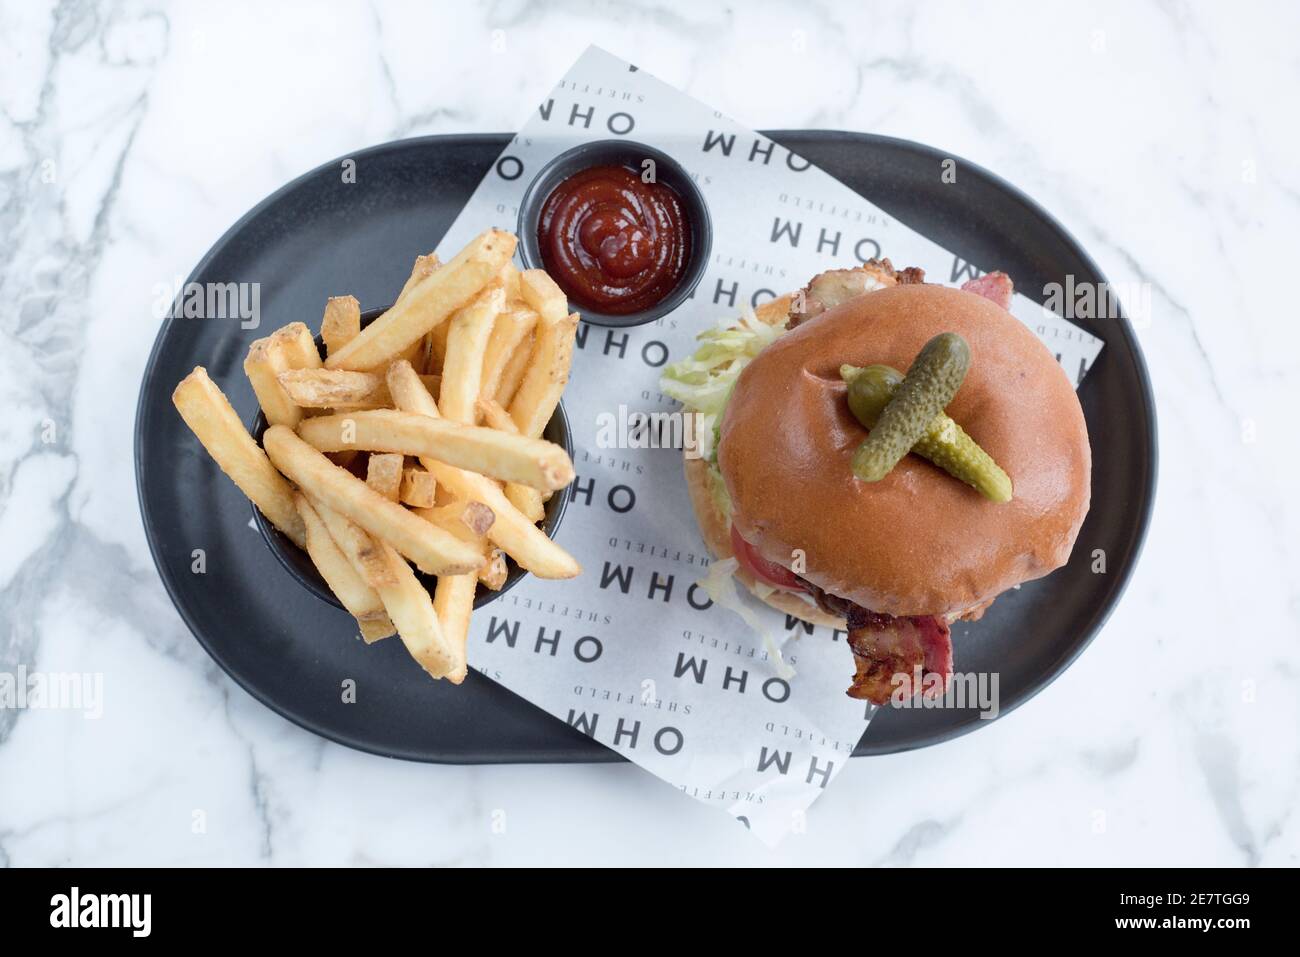 Sheffield, UK - 03 Aug 2017: Chicken cheese and bacon burger served with french fries at OHM, Fitzwilliam Street Stock Photo